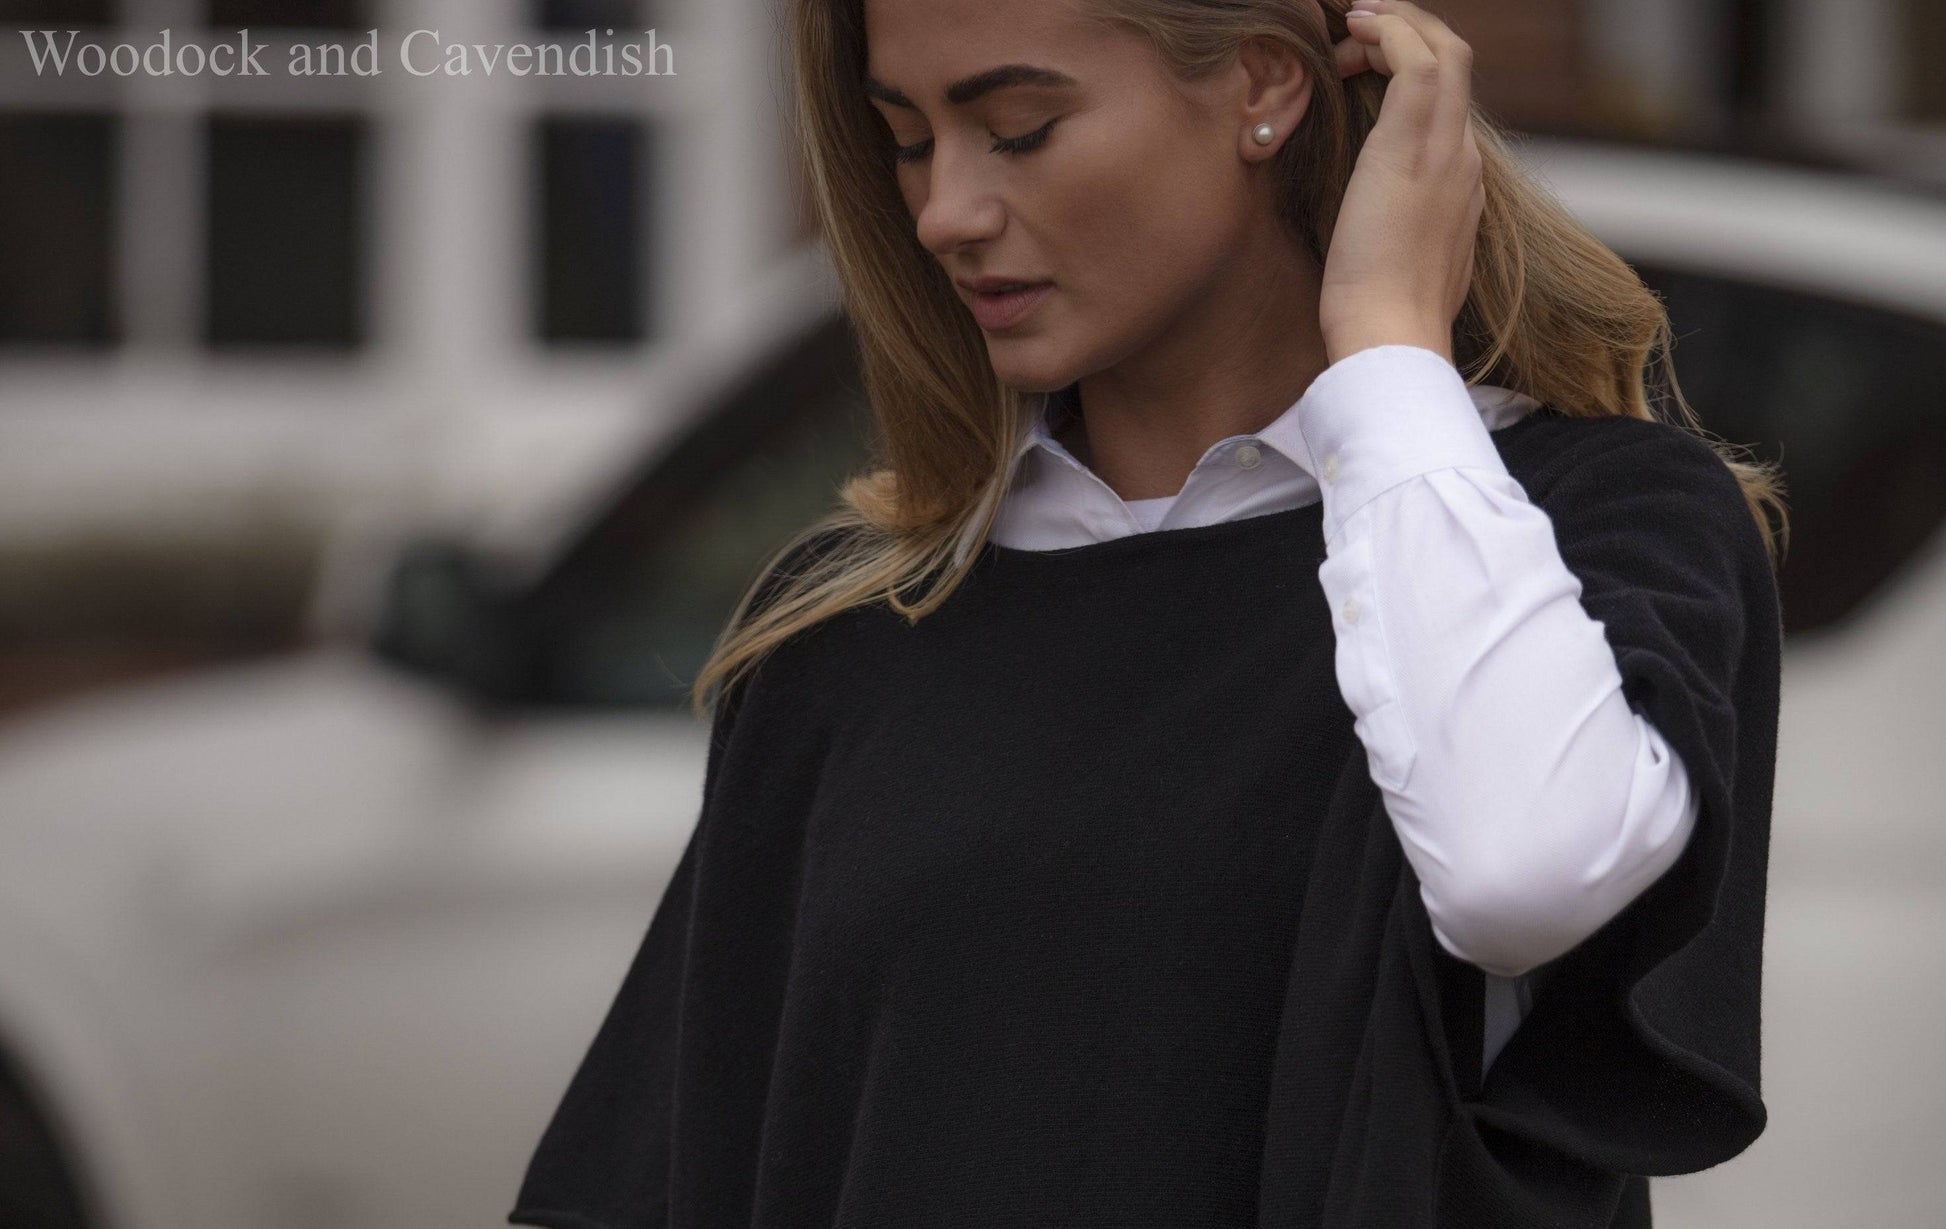 Cashmere & Merino Wool Boat Neck Poncho in Black By Woodcock & Cavendish for sale - Woodcock and Cavendish